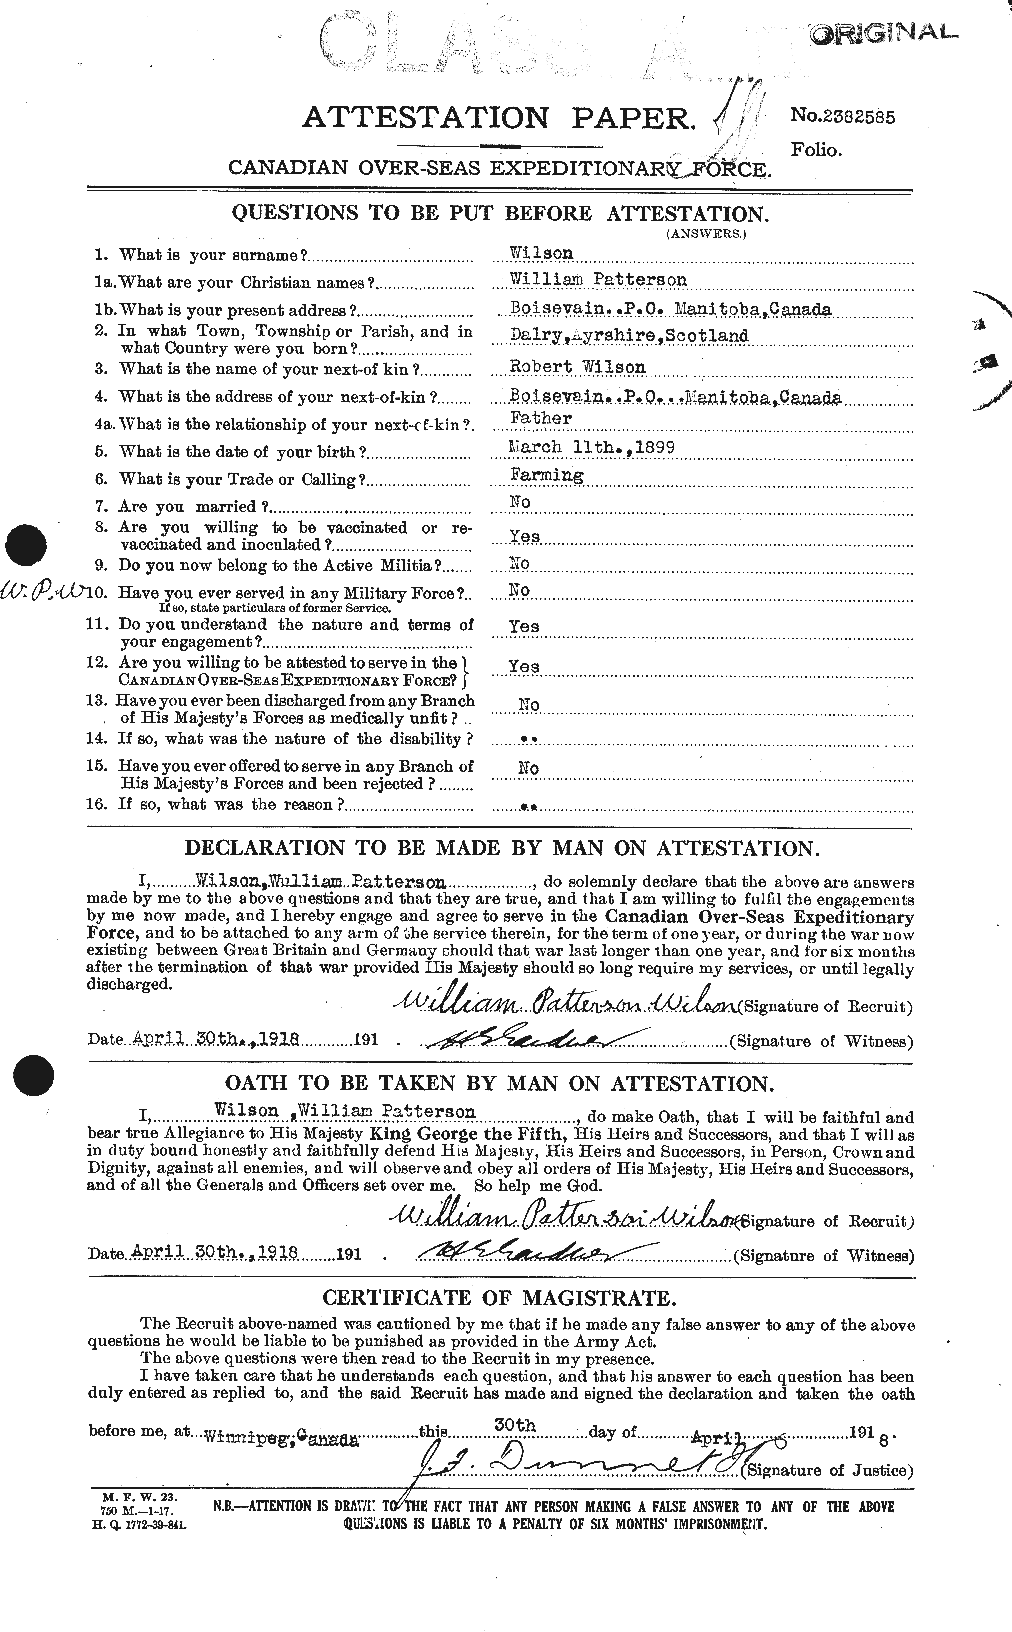 Personnel Records of the First World War - CEF 684086a